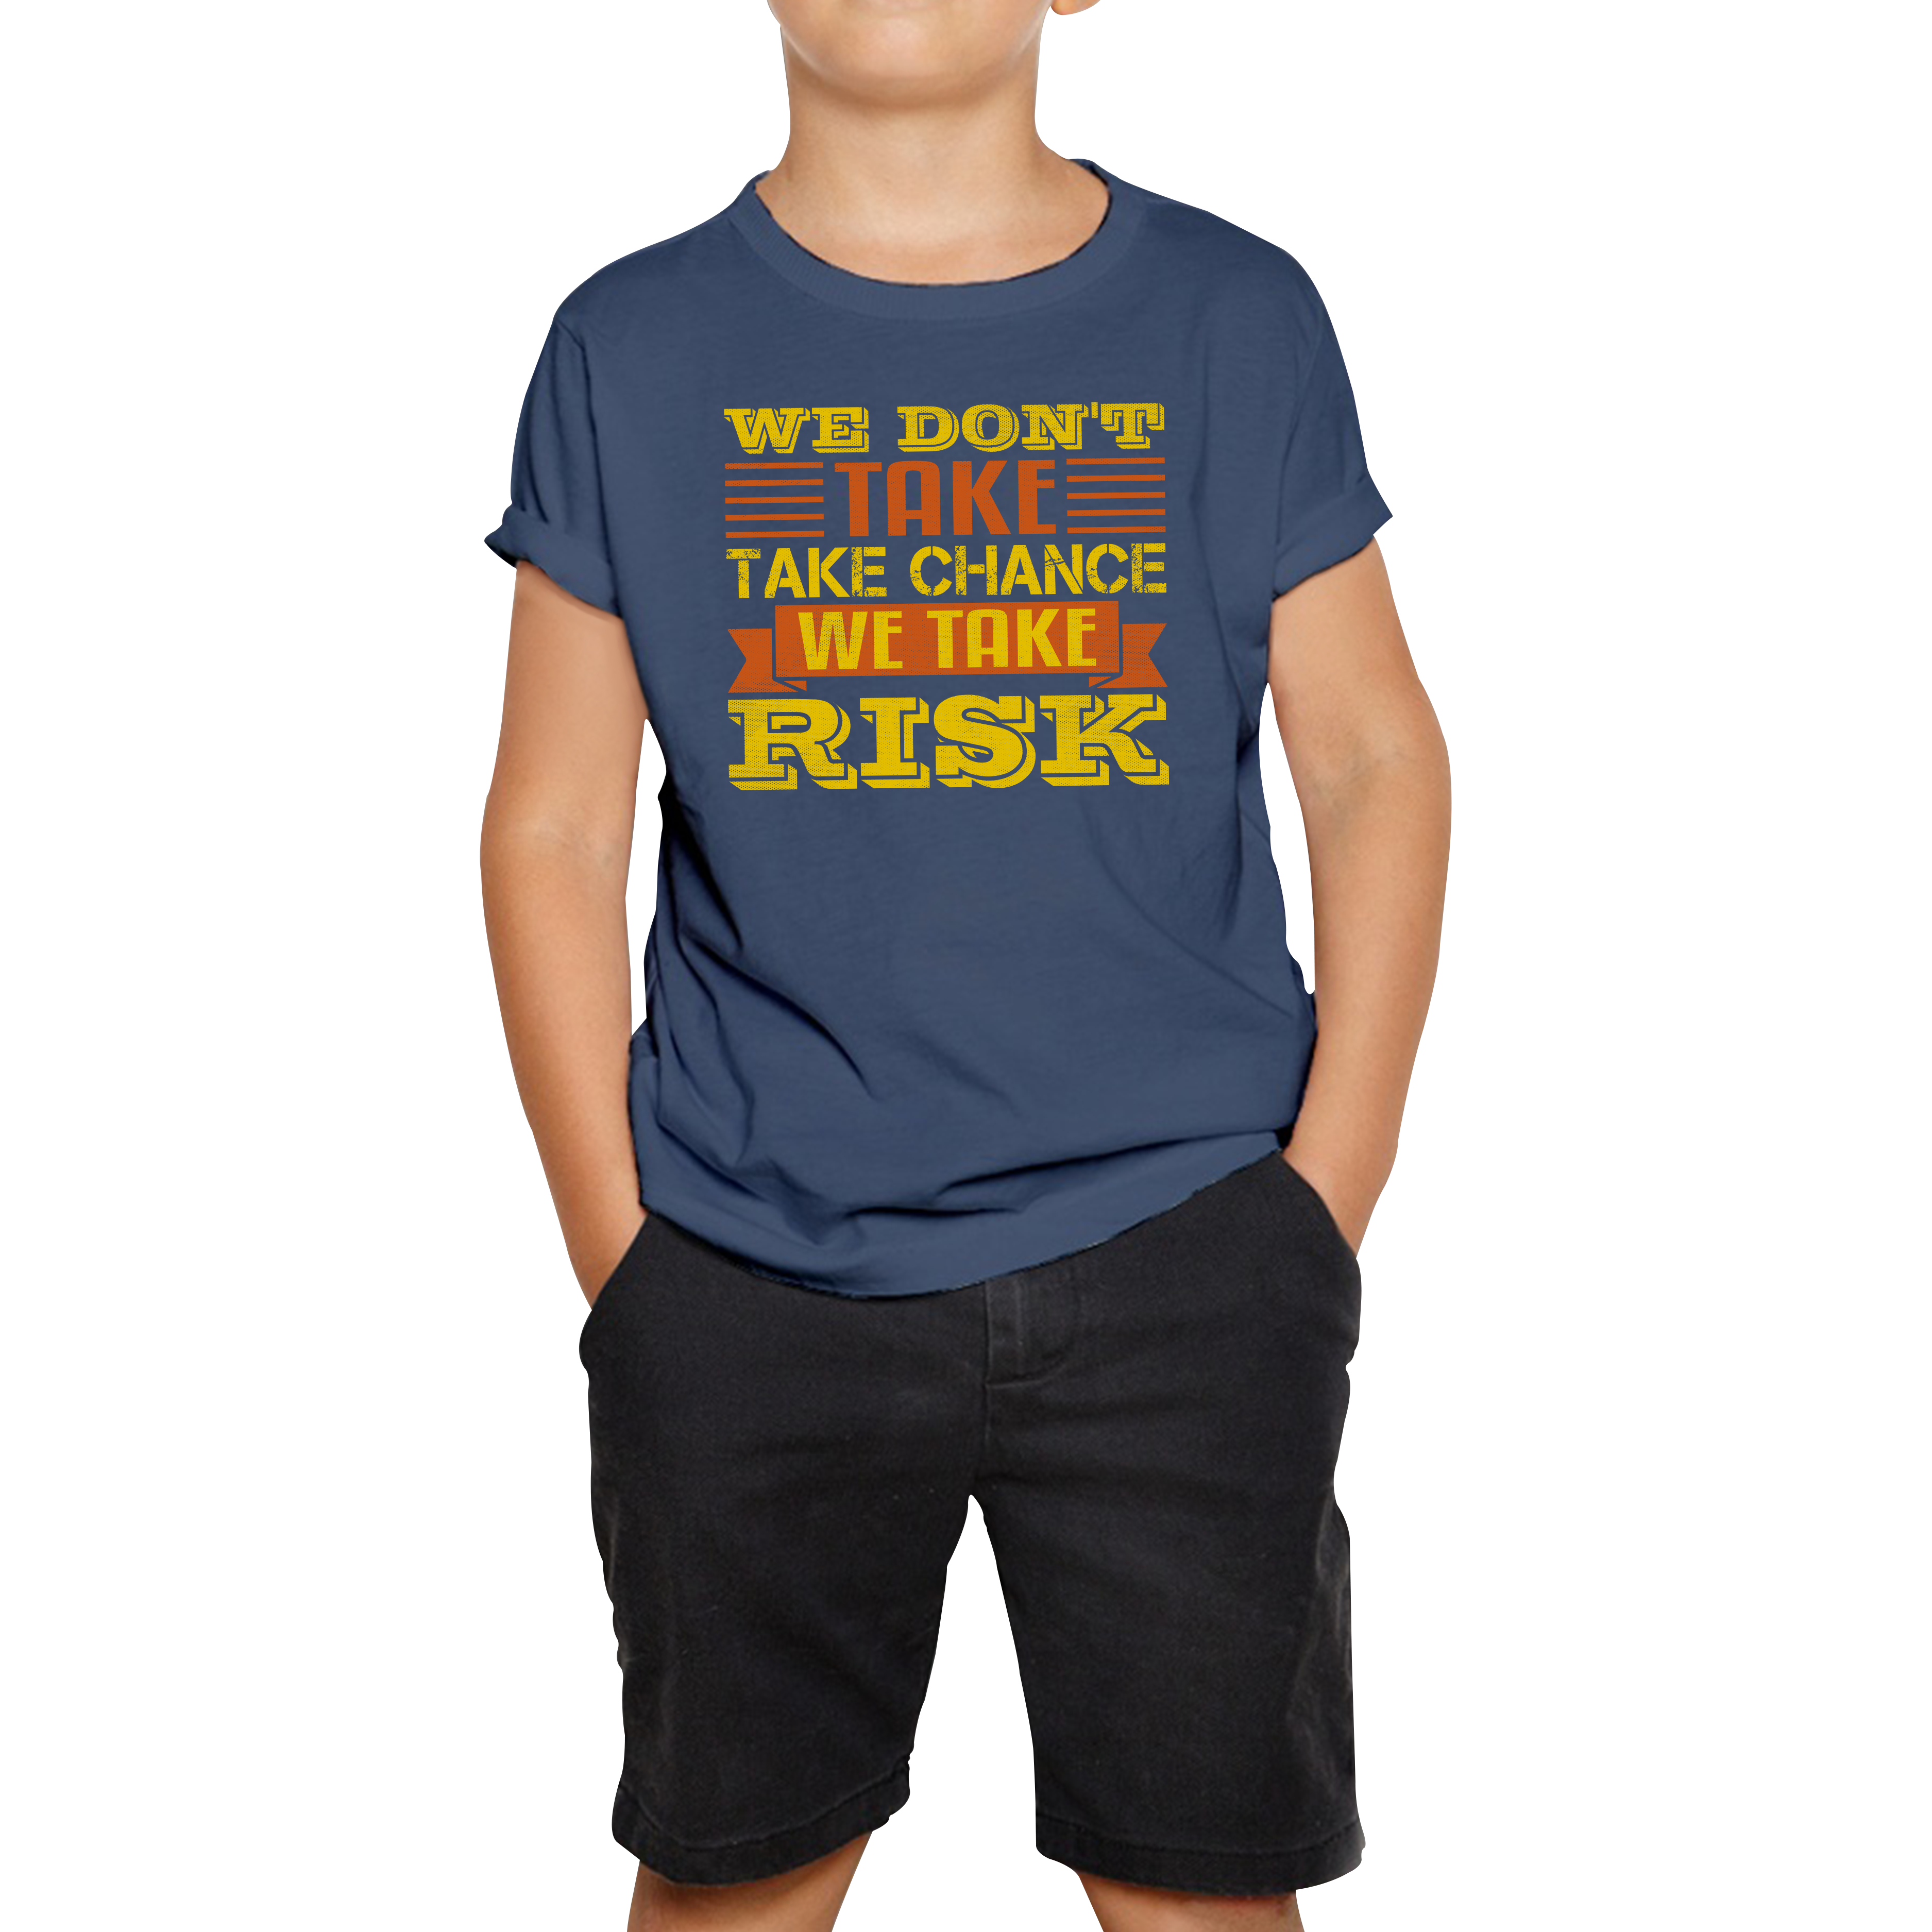 We Don't Take Chance We Take Risk, Risk Taker Funny Saying Kids Tee